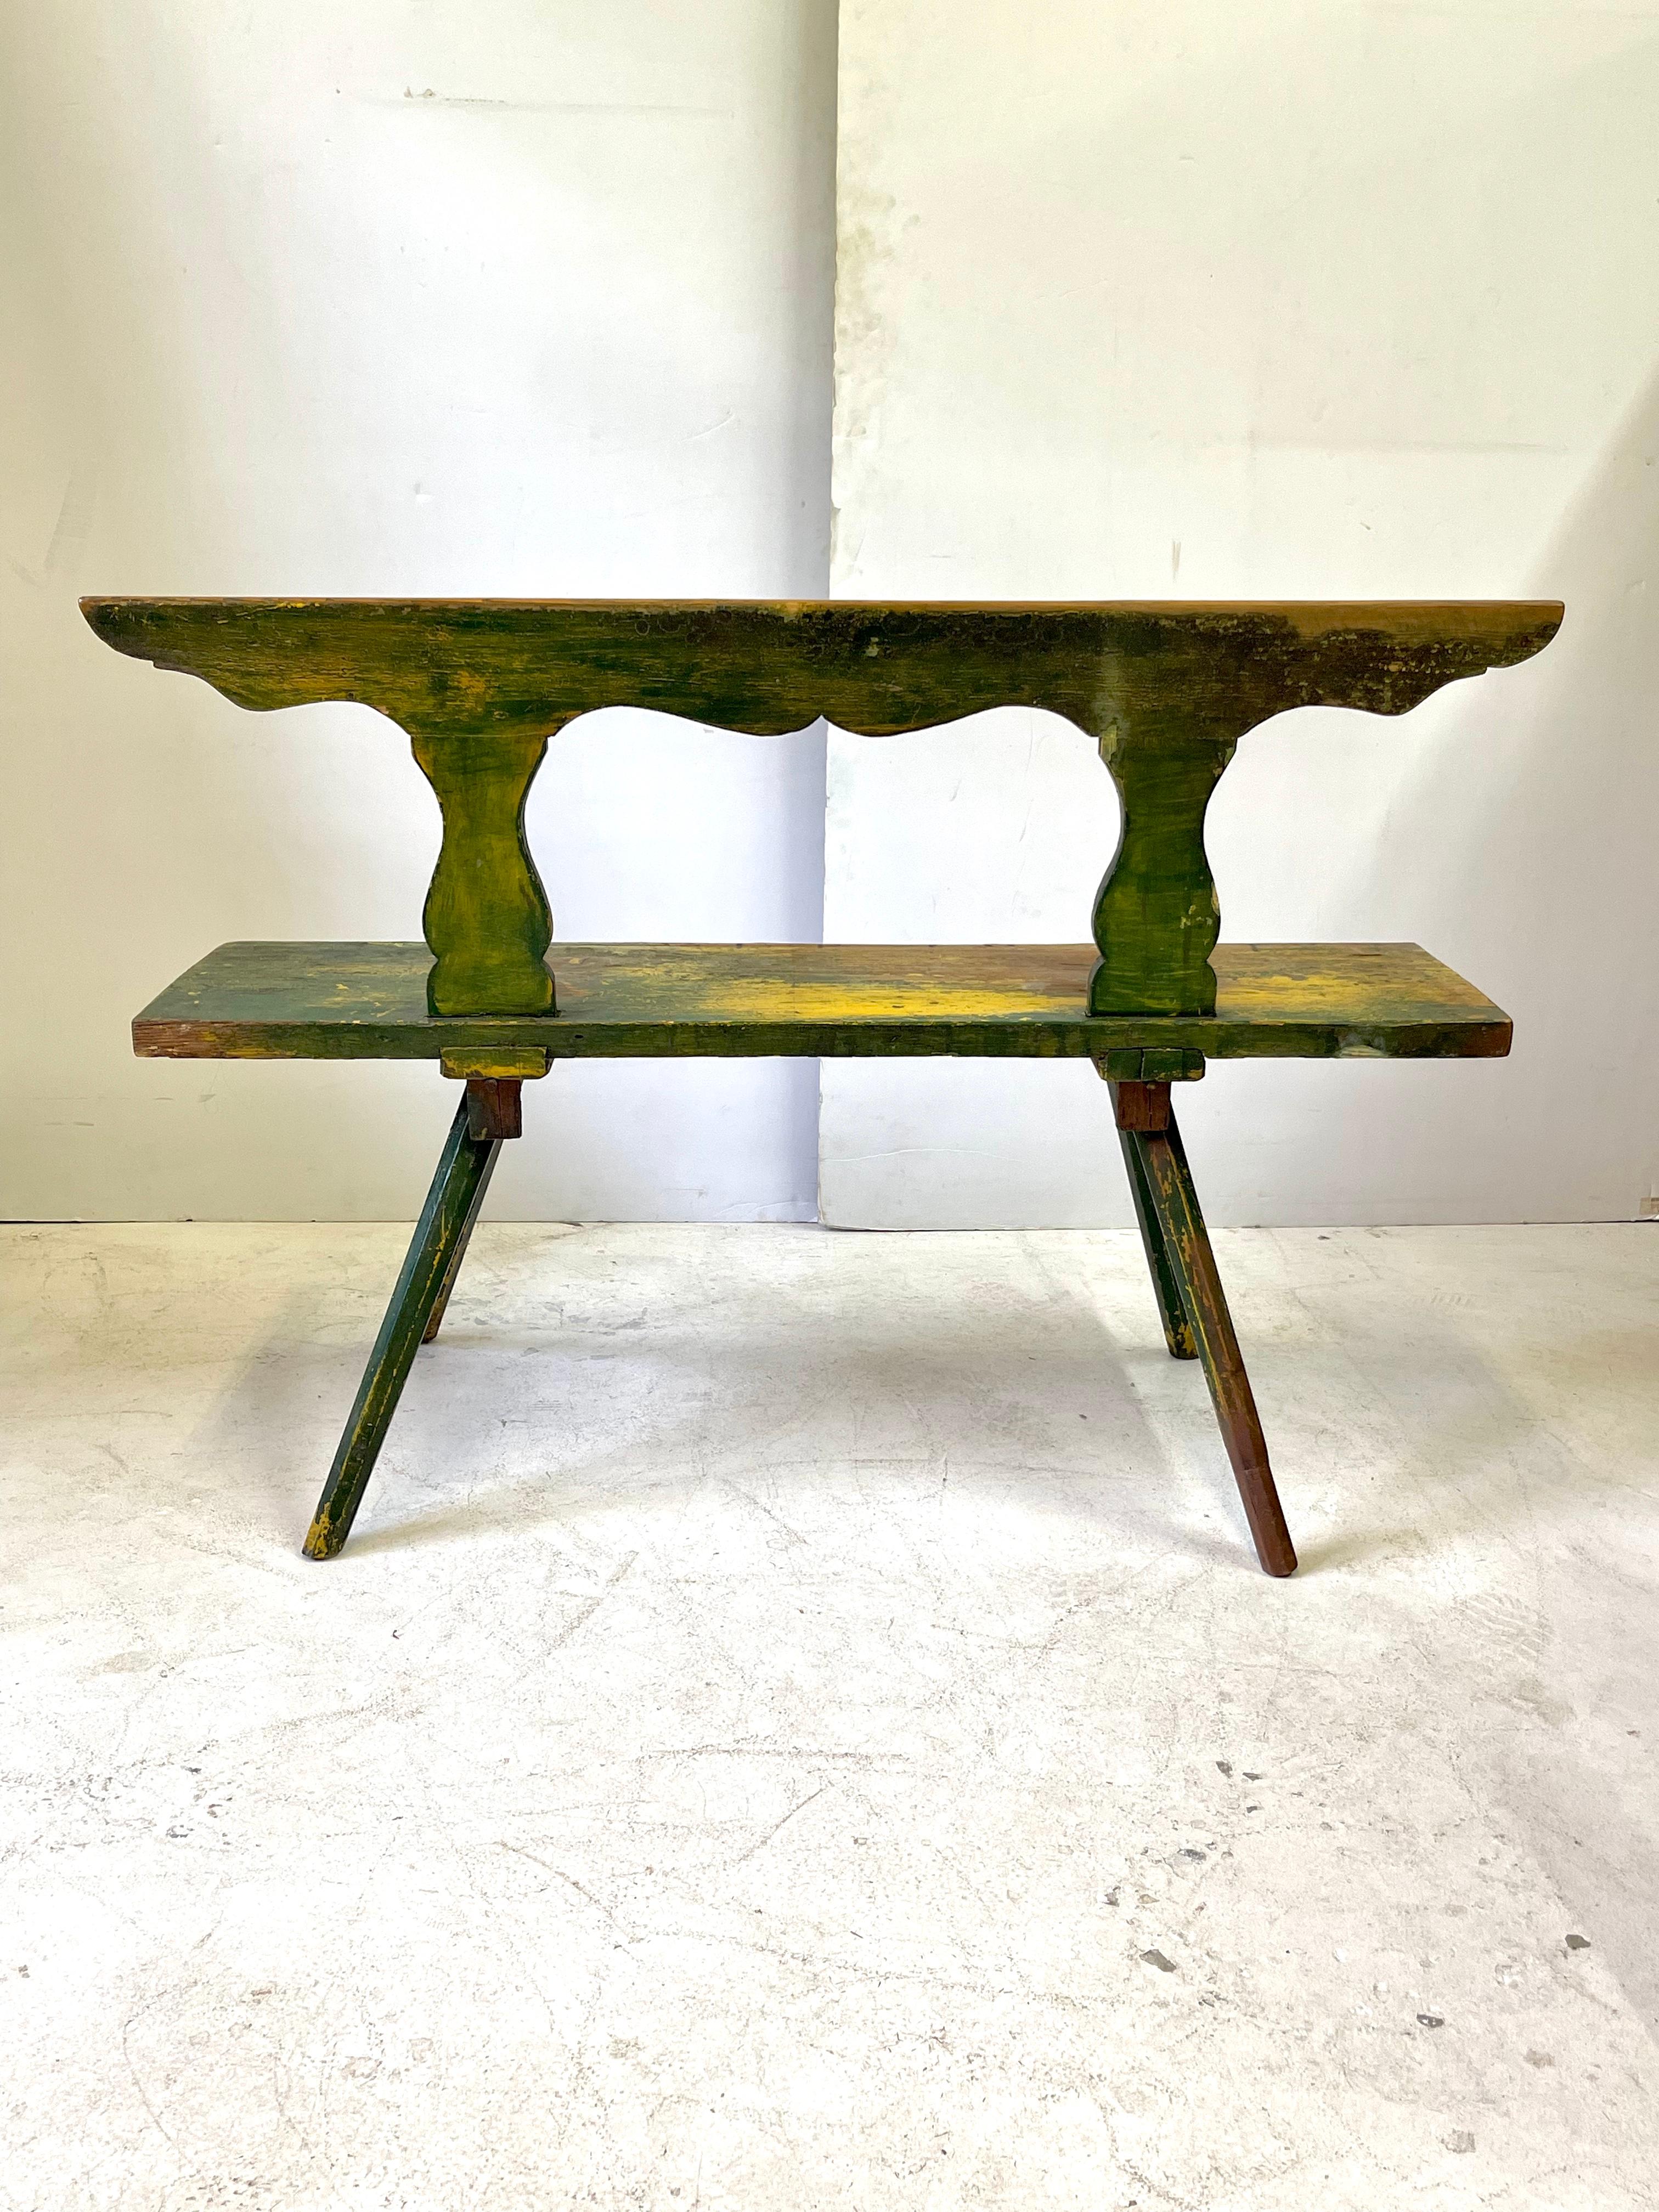 19th Century Rustic Italian Bench in Green and Yellow Paint 1